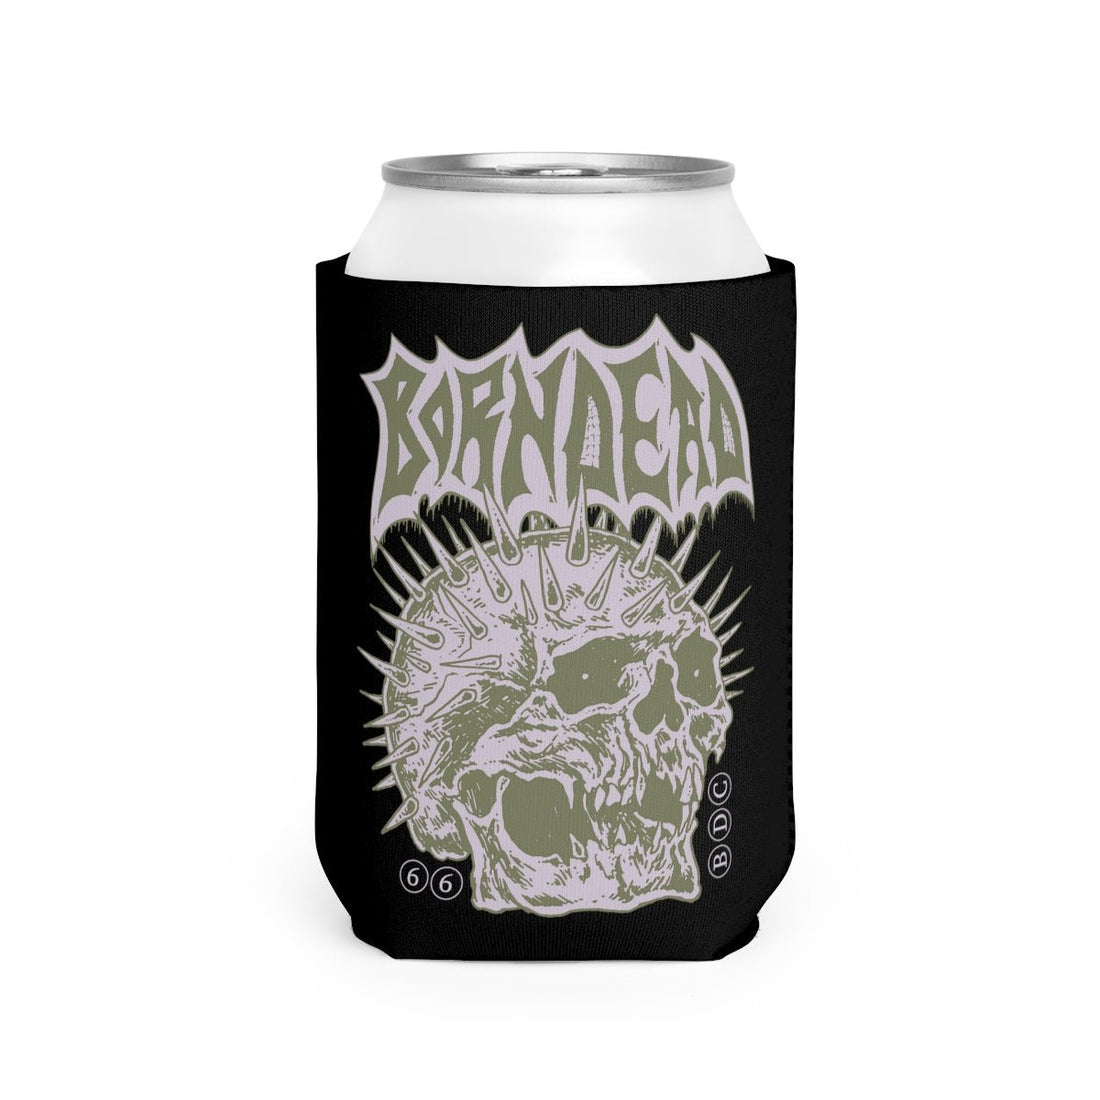 Born Dead Tattoo Inspired Can Cooler Sleeve